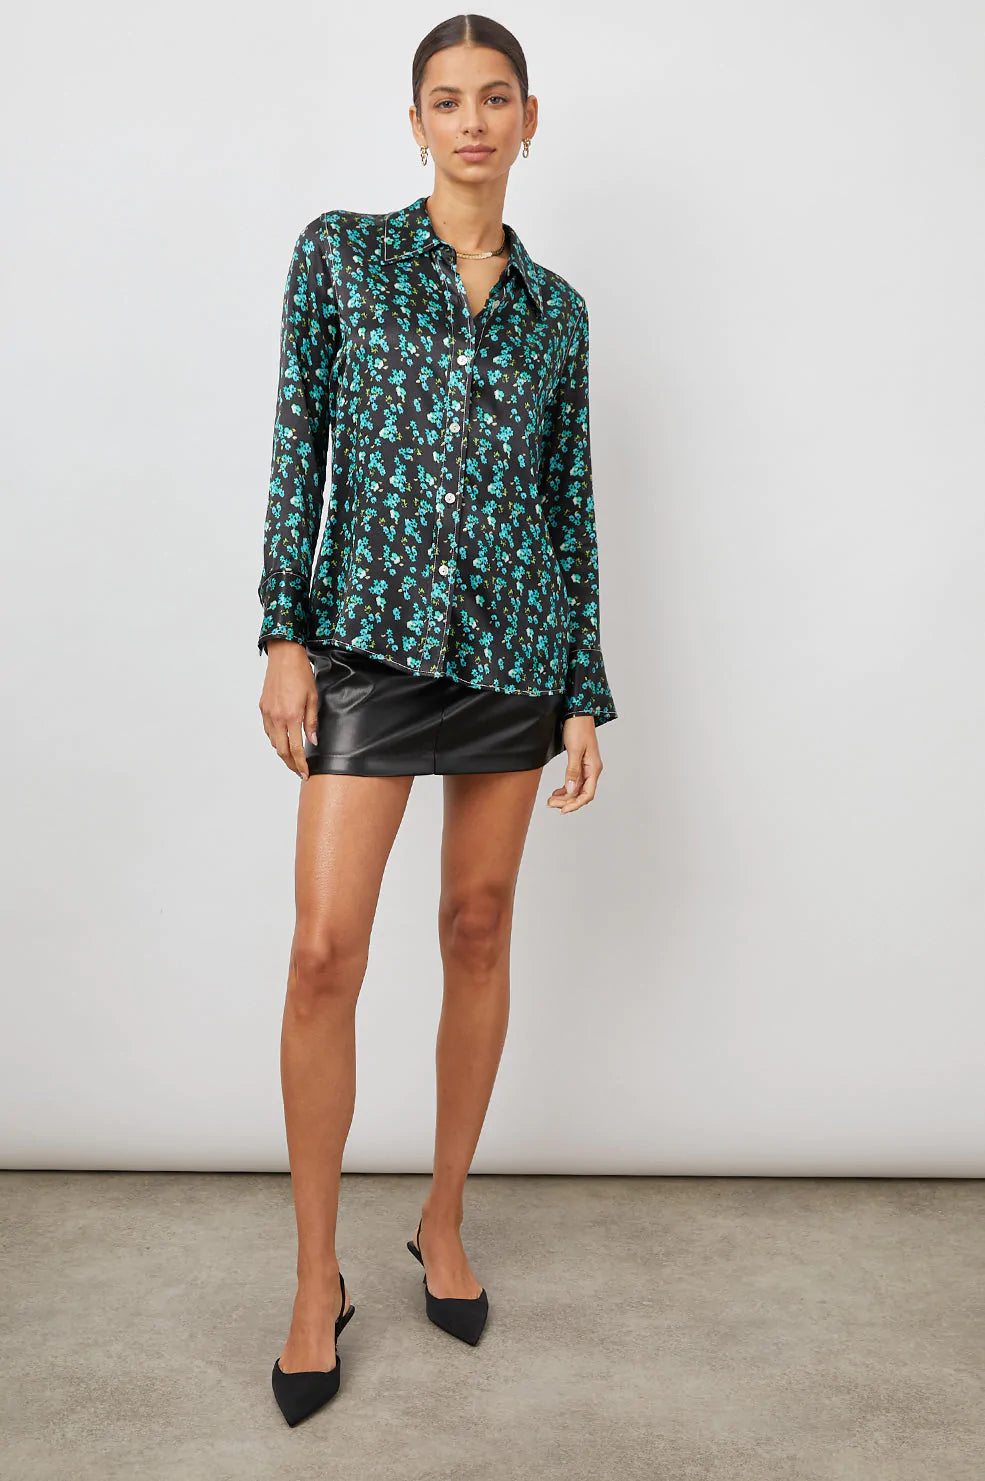 Green floral shirt with black background 